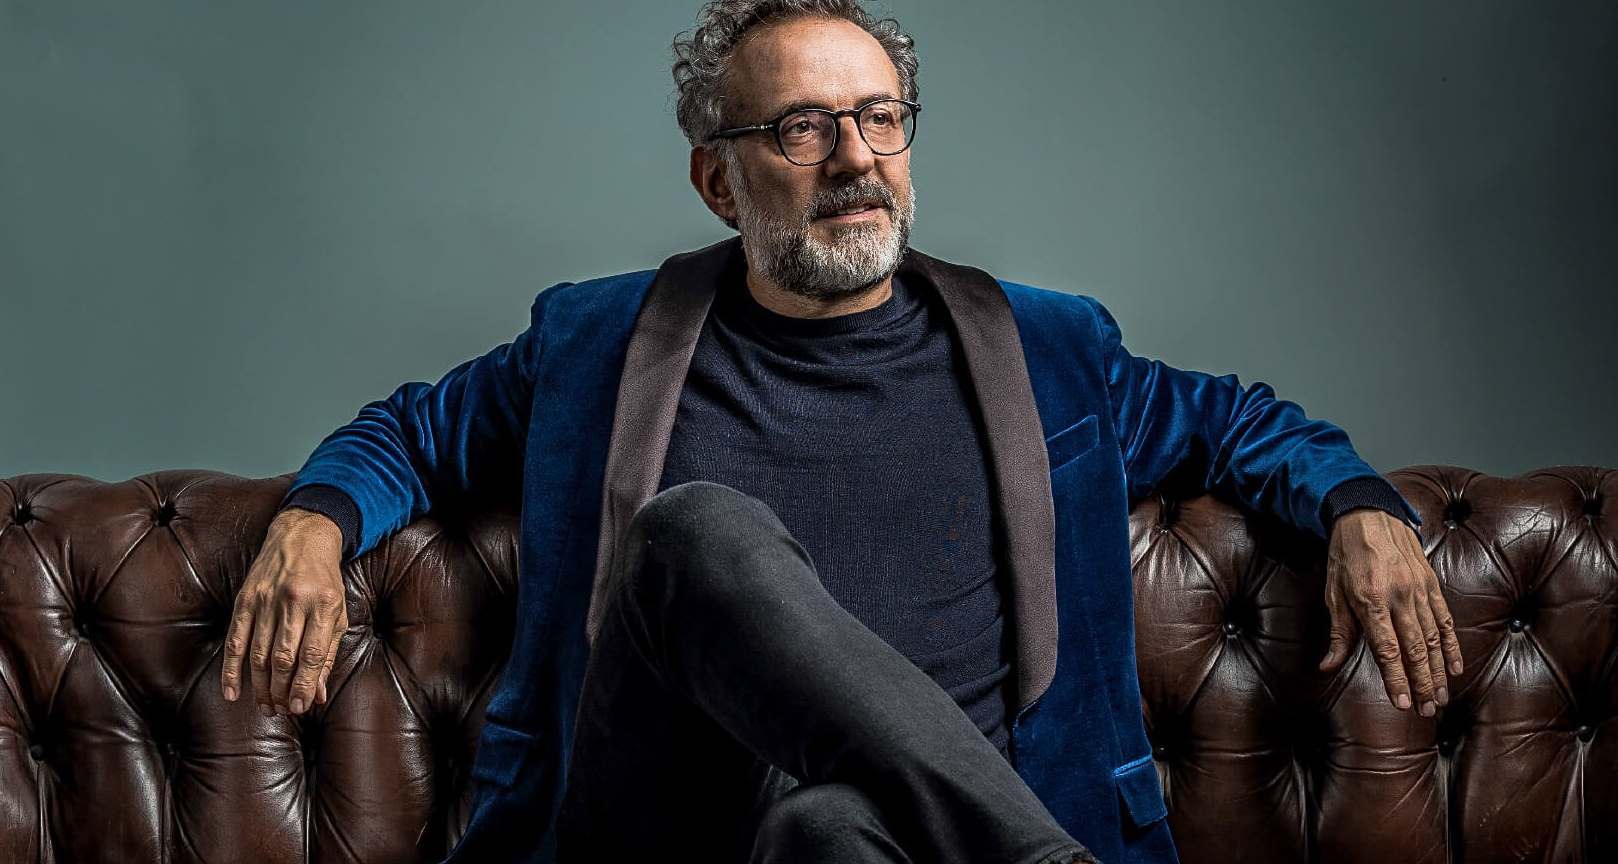 Eclectic and bright: Art lover Massimo Bottura’s spectacular culinary creations have earned him a spot in the fine-dining Pantheon.